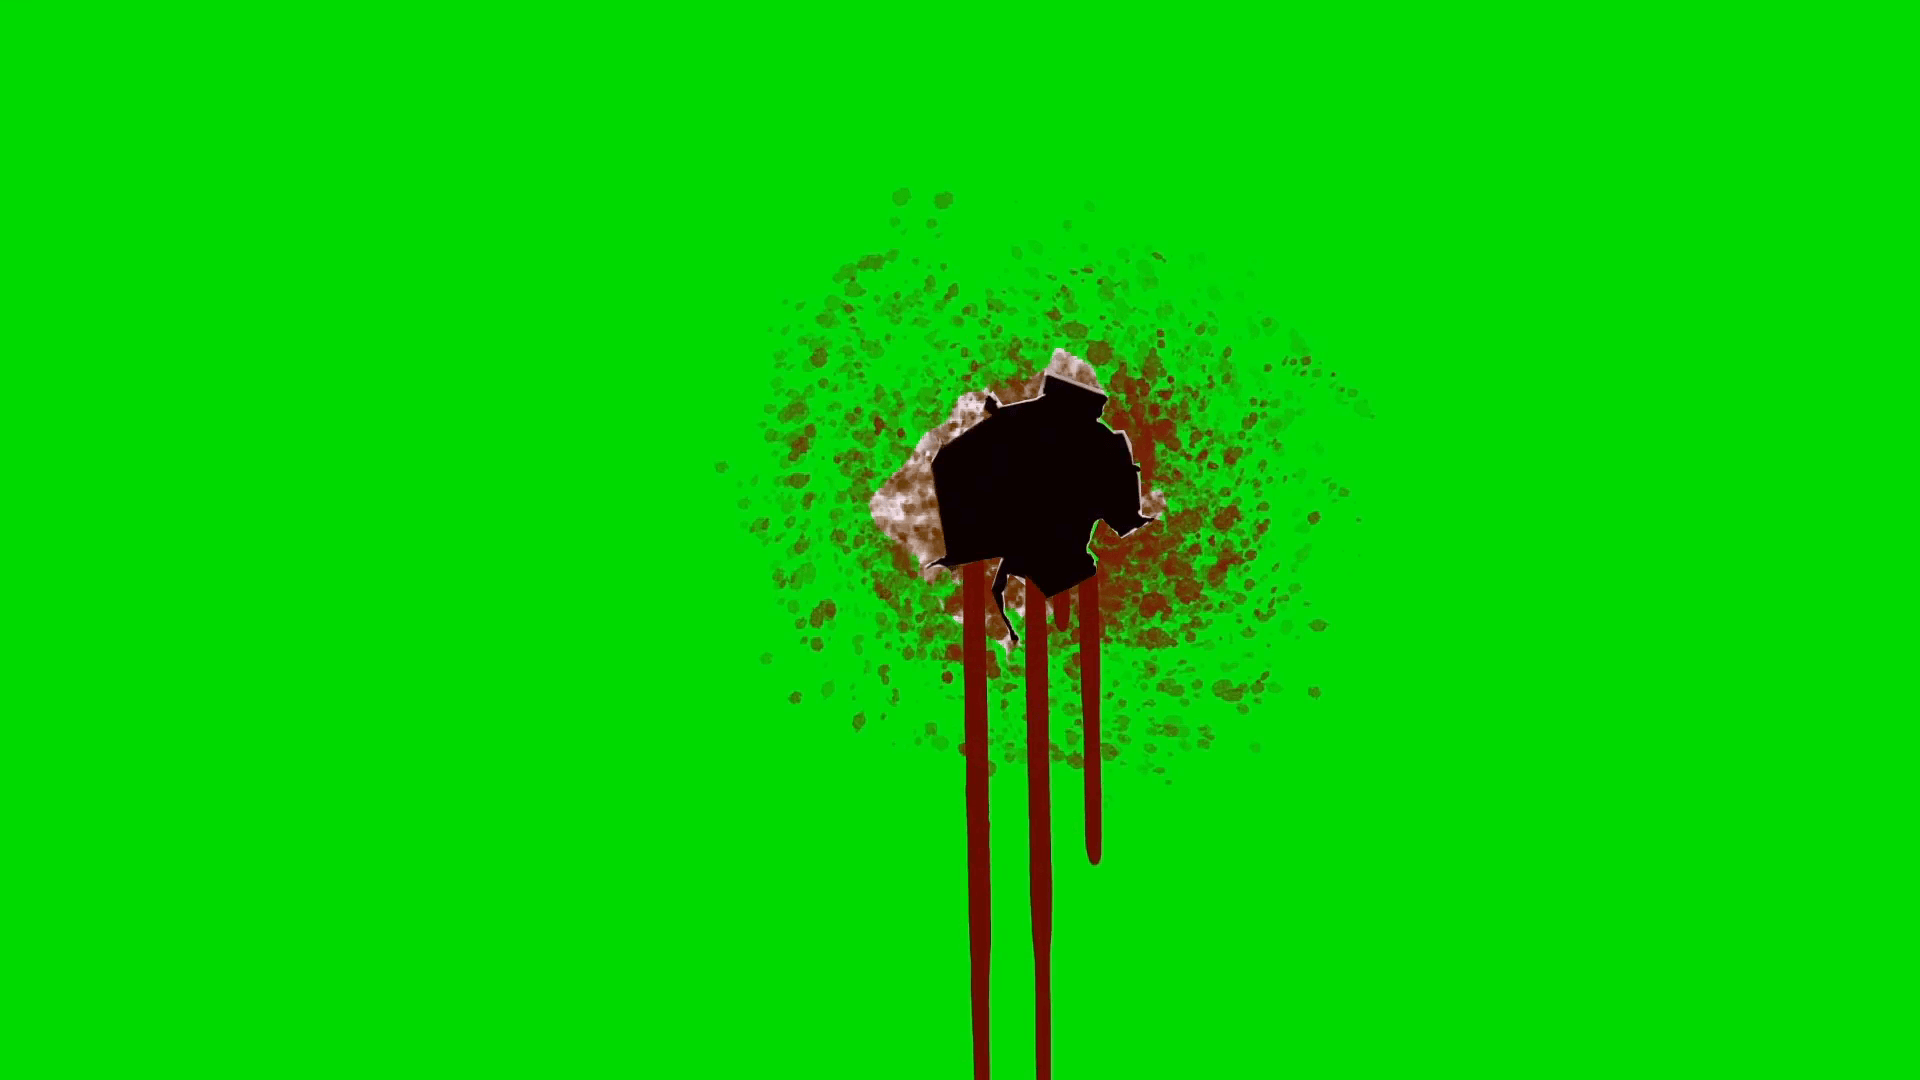 Bleeding Bullet Hole on a Green Screen Background Motion Background